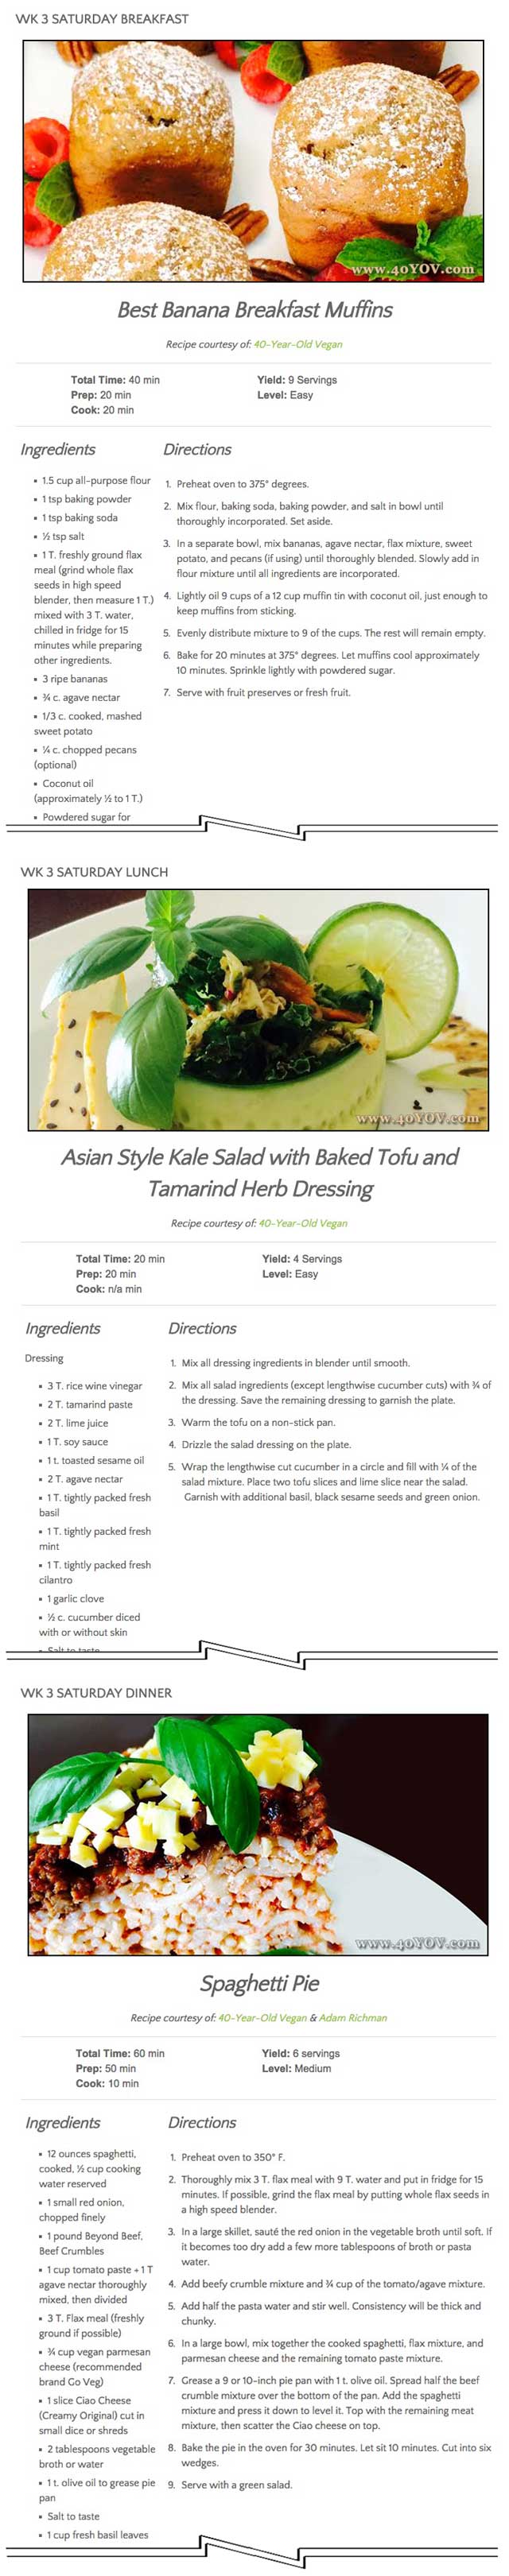 we added three additional recipes from Sandra Sellani (Vegan Chef and author of What’s Your BQ?) to the Food Self-sufficiency Transition Plan – These recipes are: Banana Breakfast Muffins, Asian Style Salad with Tamarind Dressing, and Spaghetti Pie, One Community